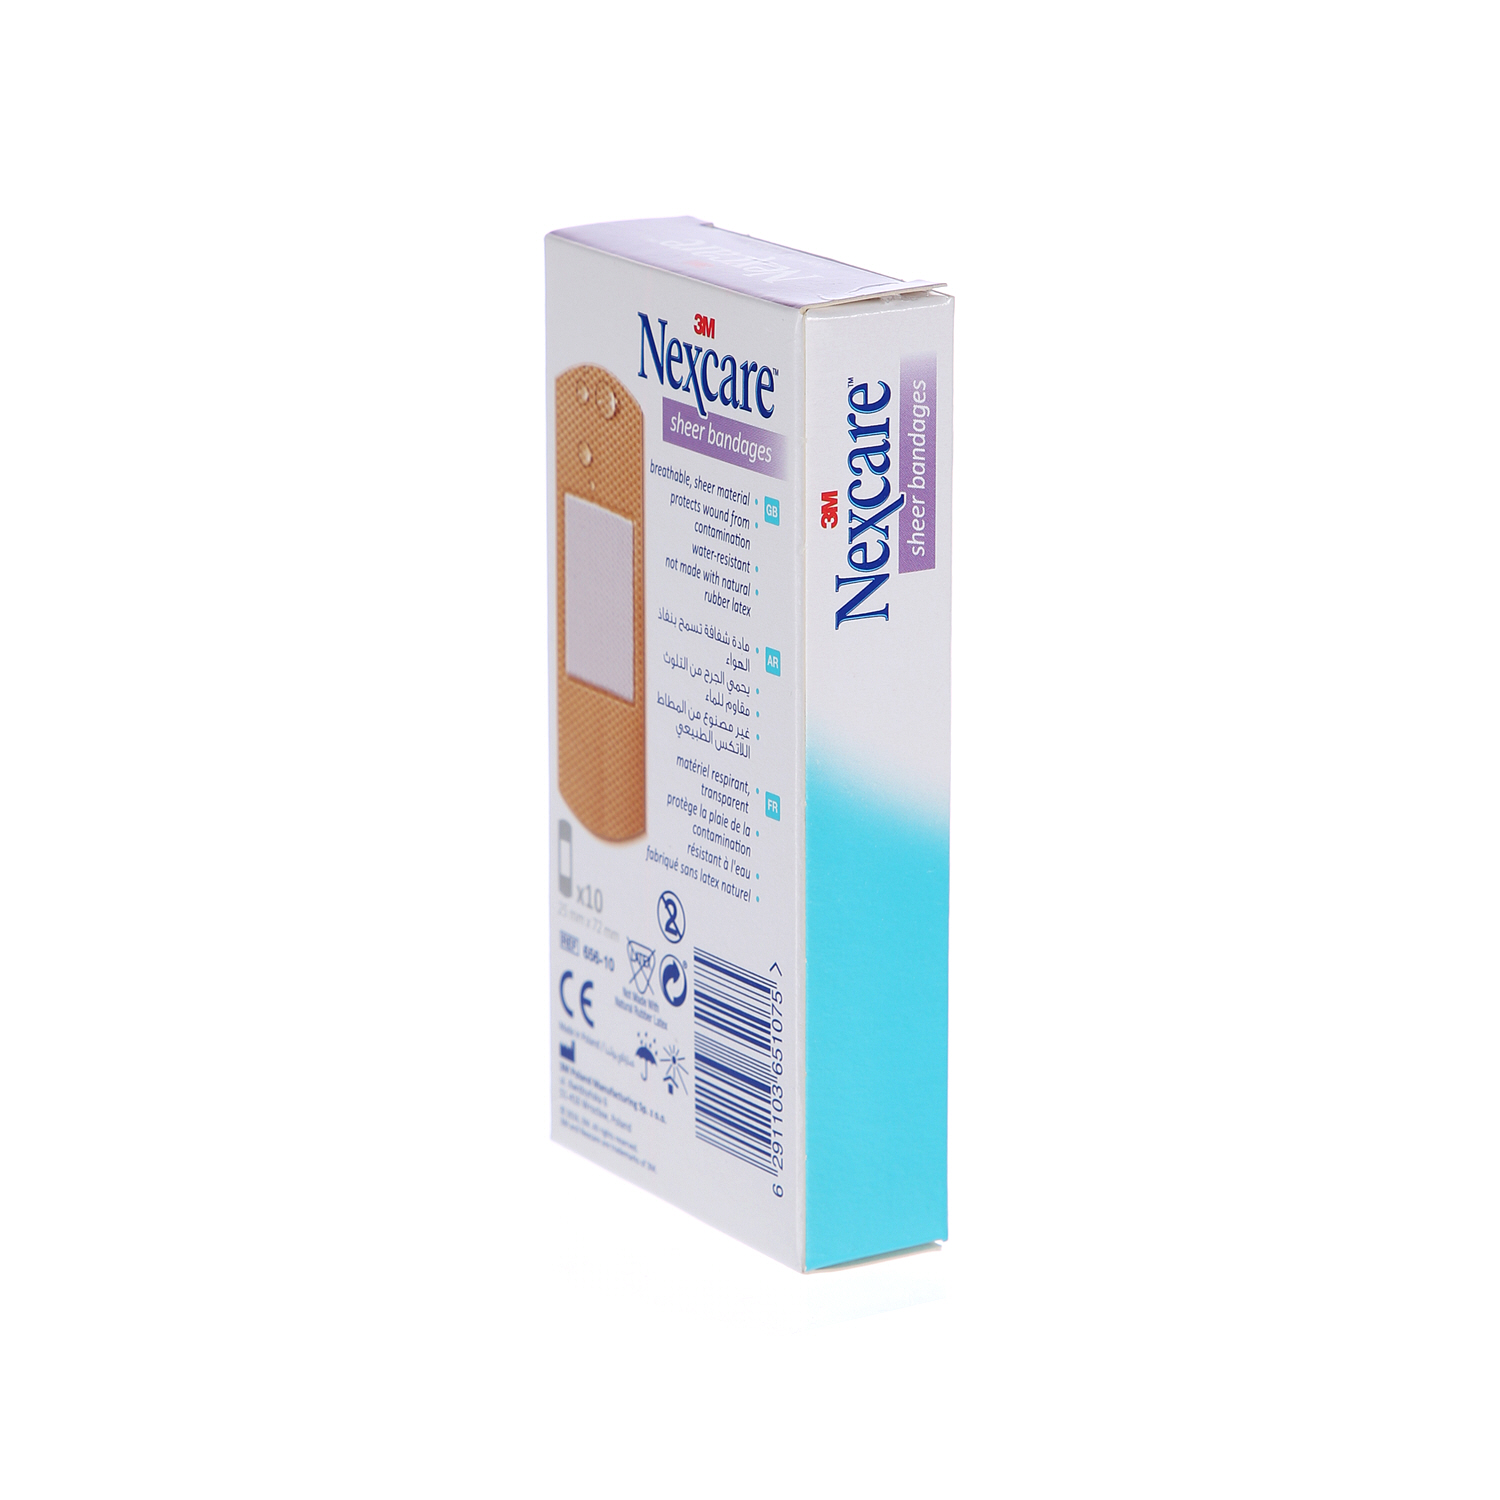 3M Nexcare Sheer Bandages 10'S